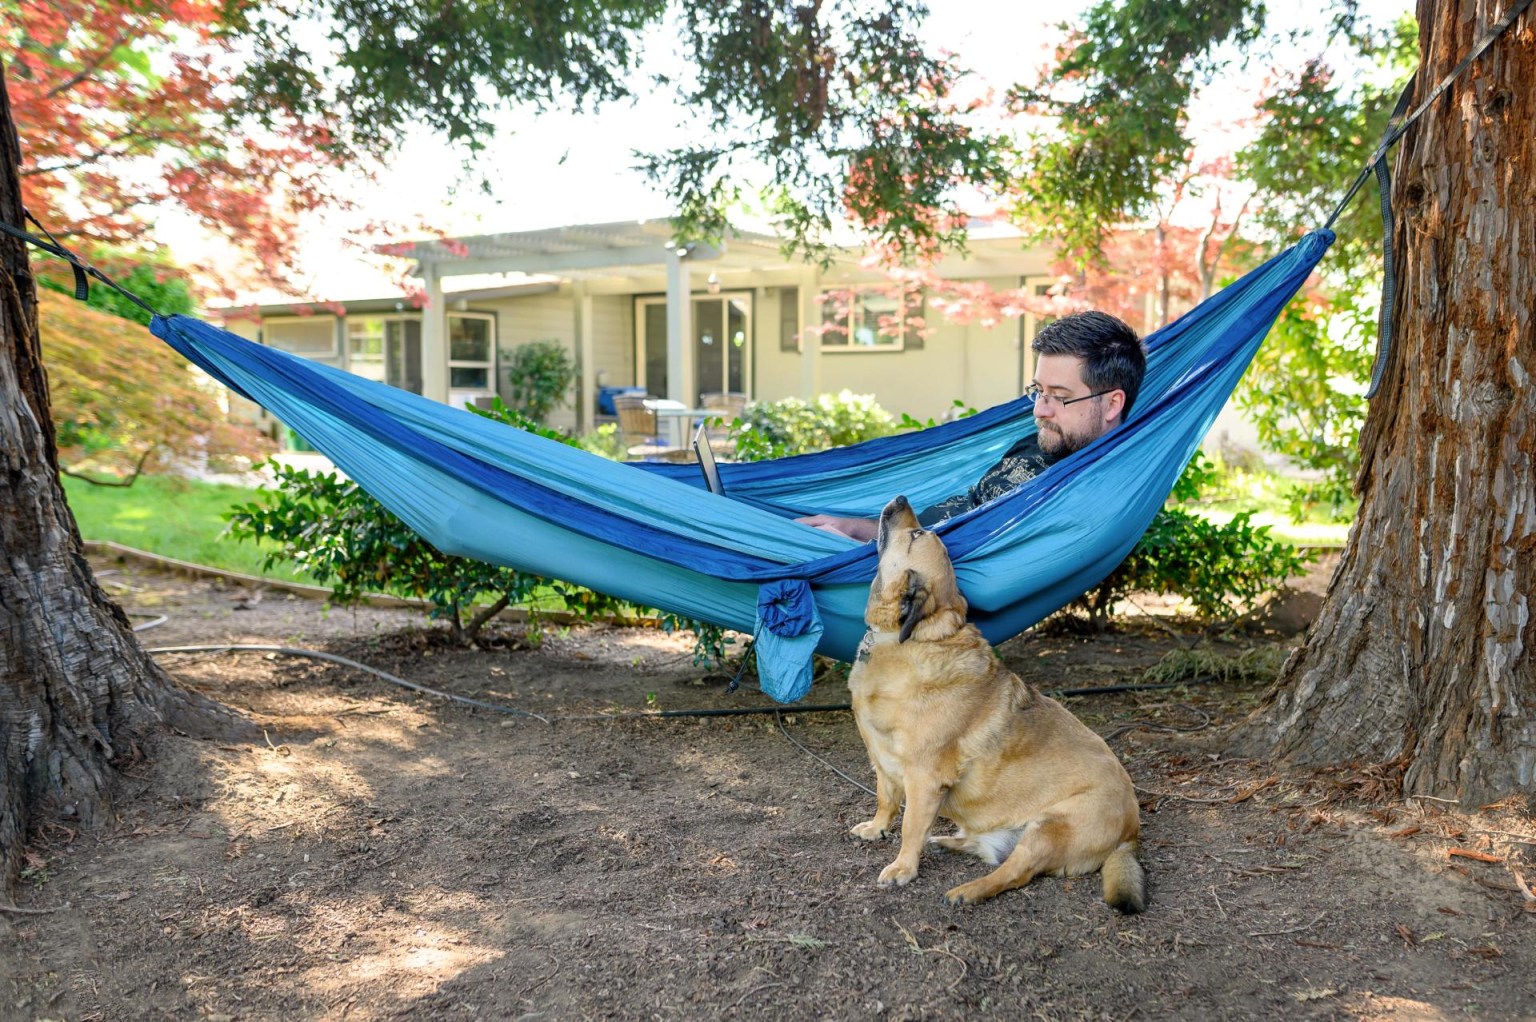 Brandon Wright works on his laptop while laying in a hammock and his dog sitting next to him